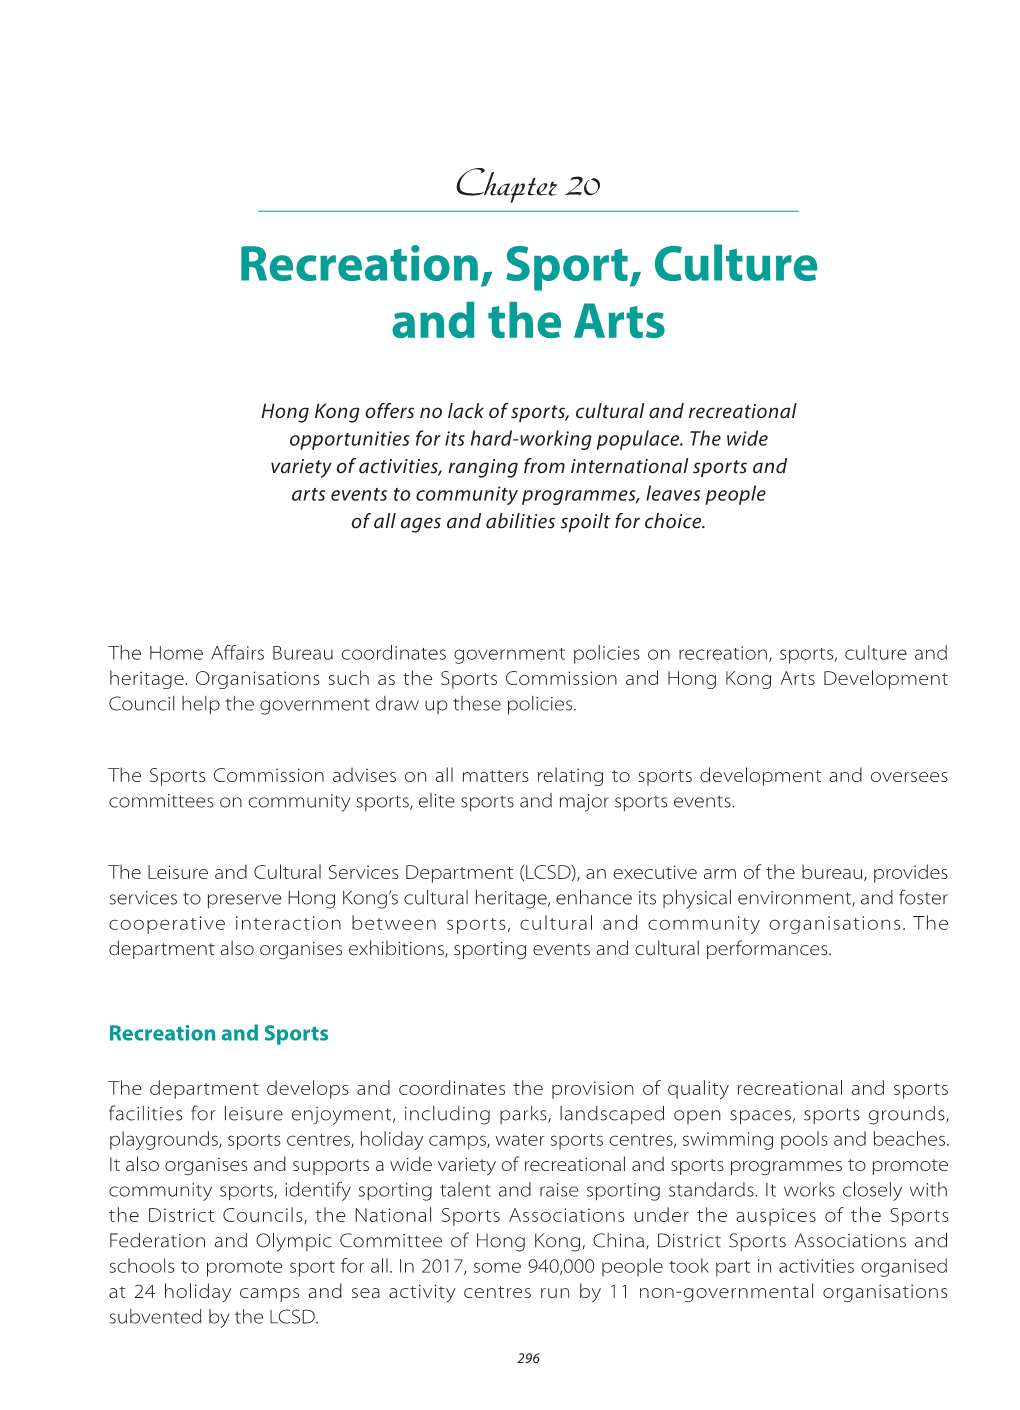 Recreation, Sport, Culture and the Arts